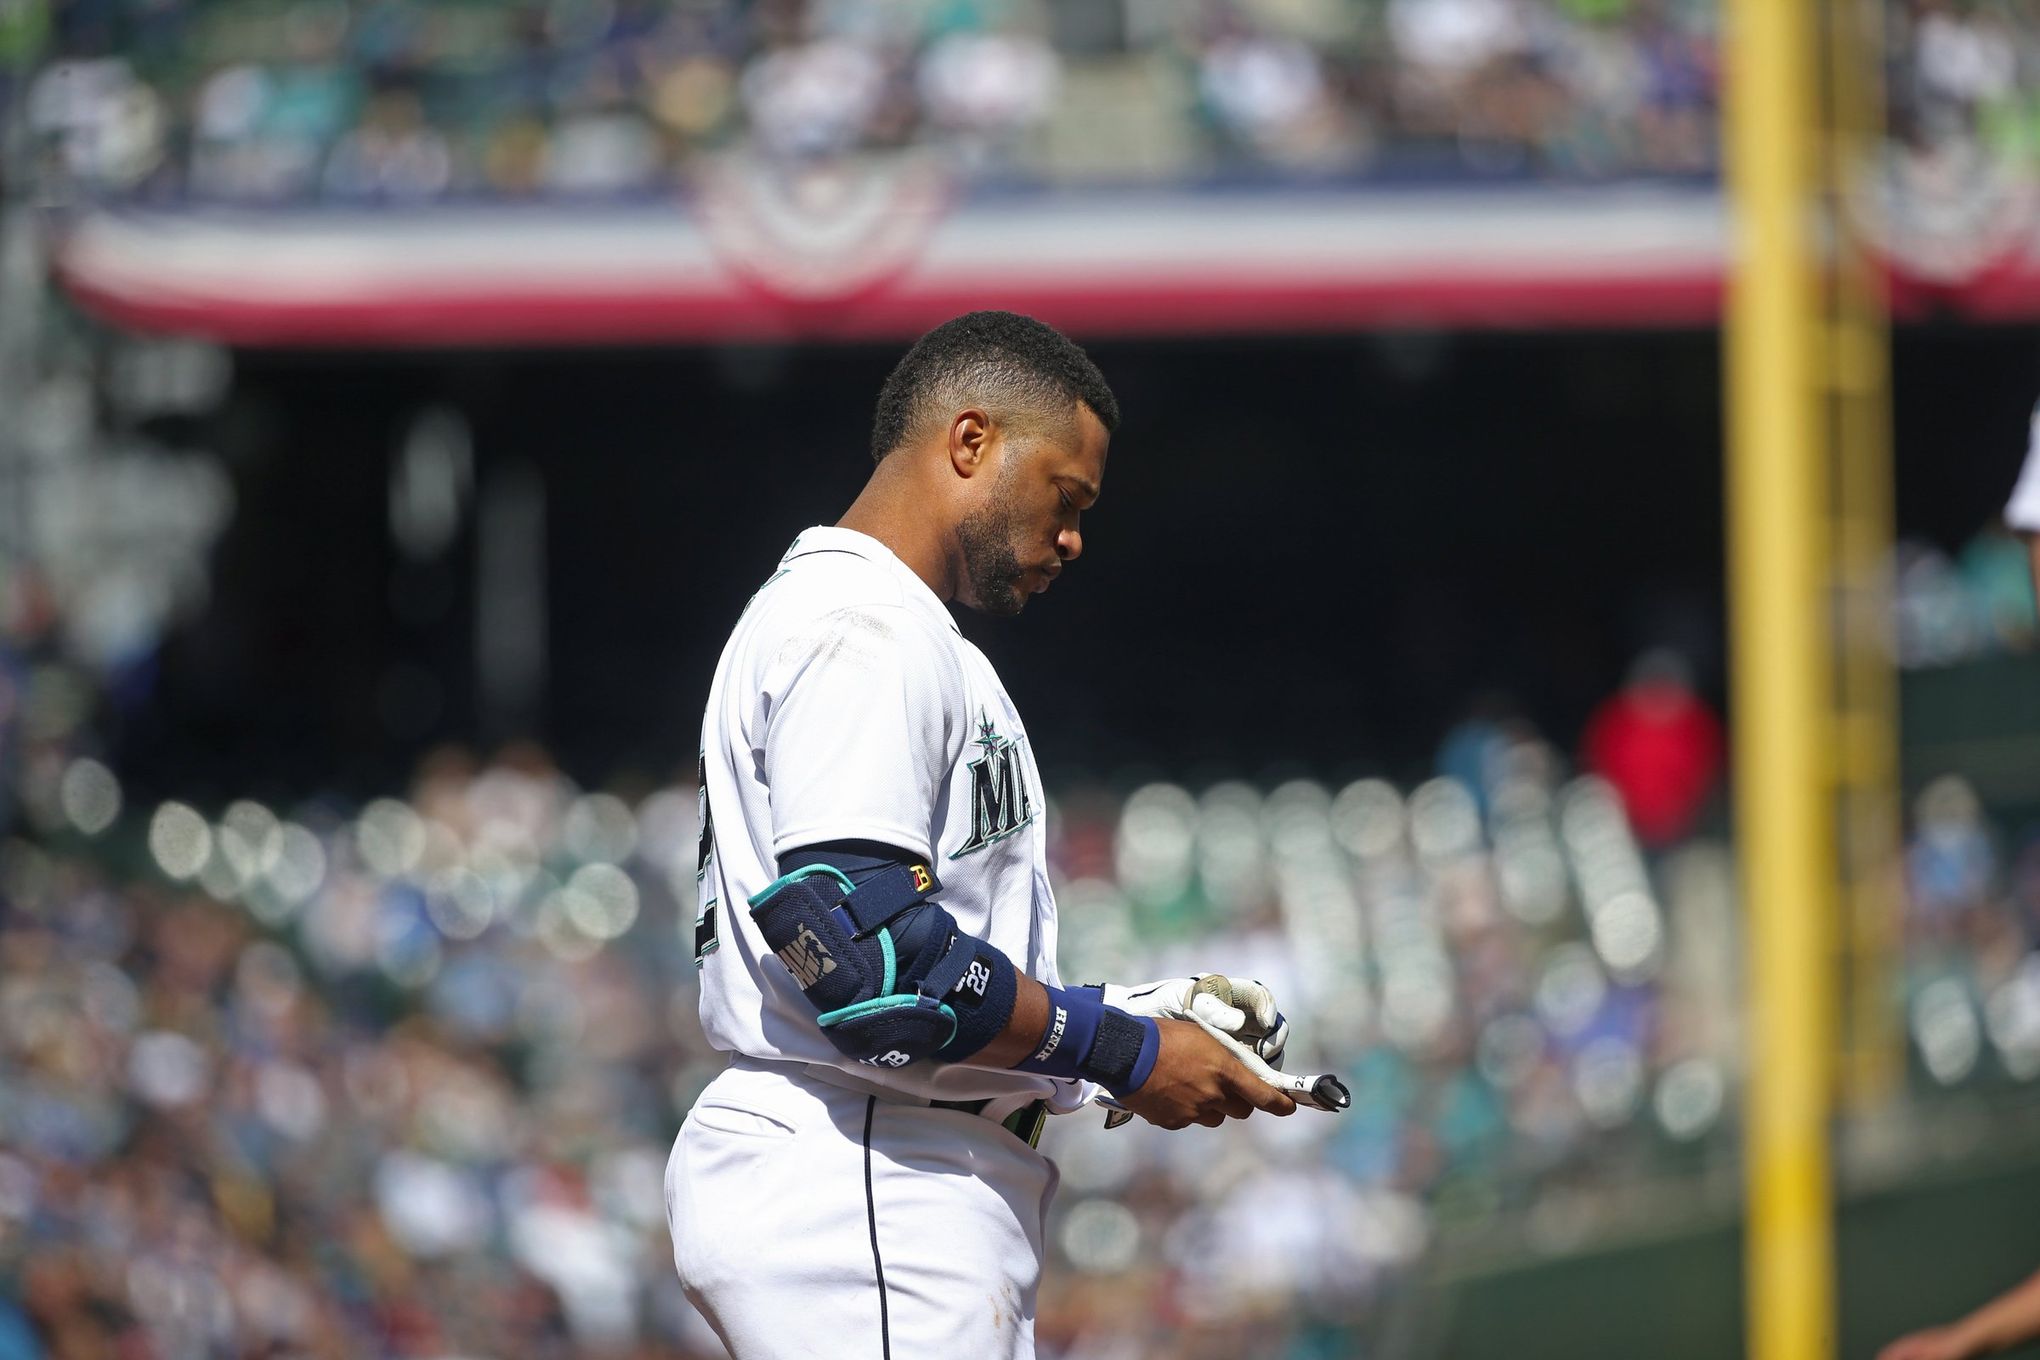 Baseball star Robinson Cano banned for 80 games for failed drugs